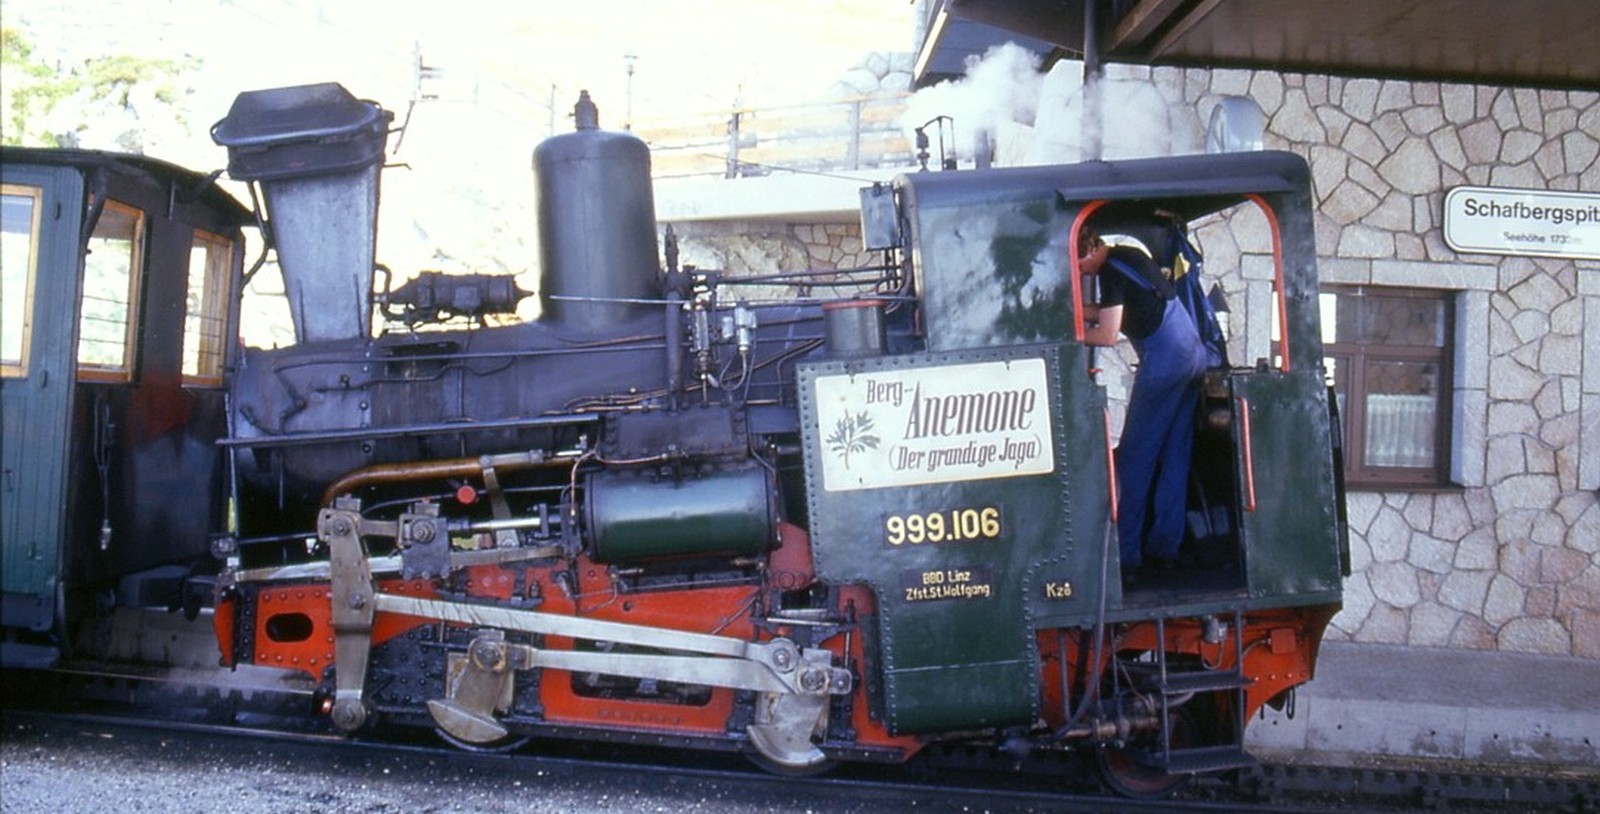 999.106 "Berganemone" in September 1987 in the mountain station of the Schafbergbahn